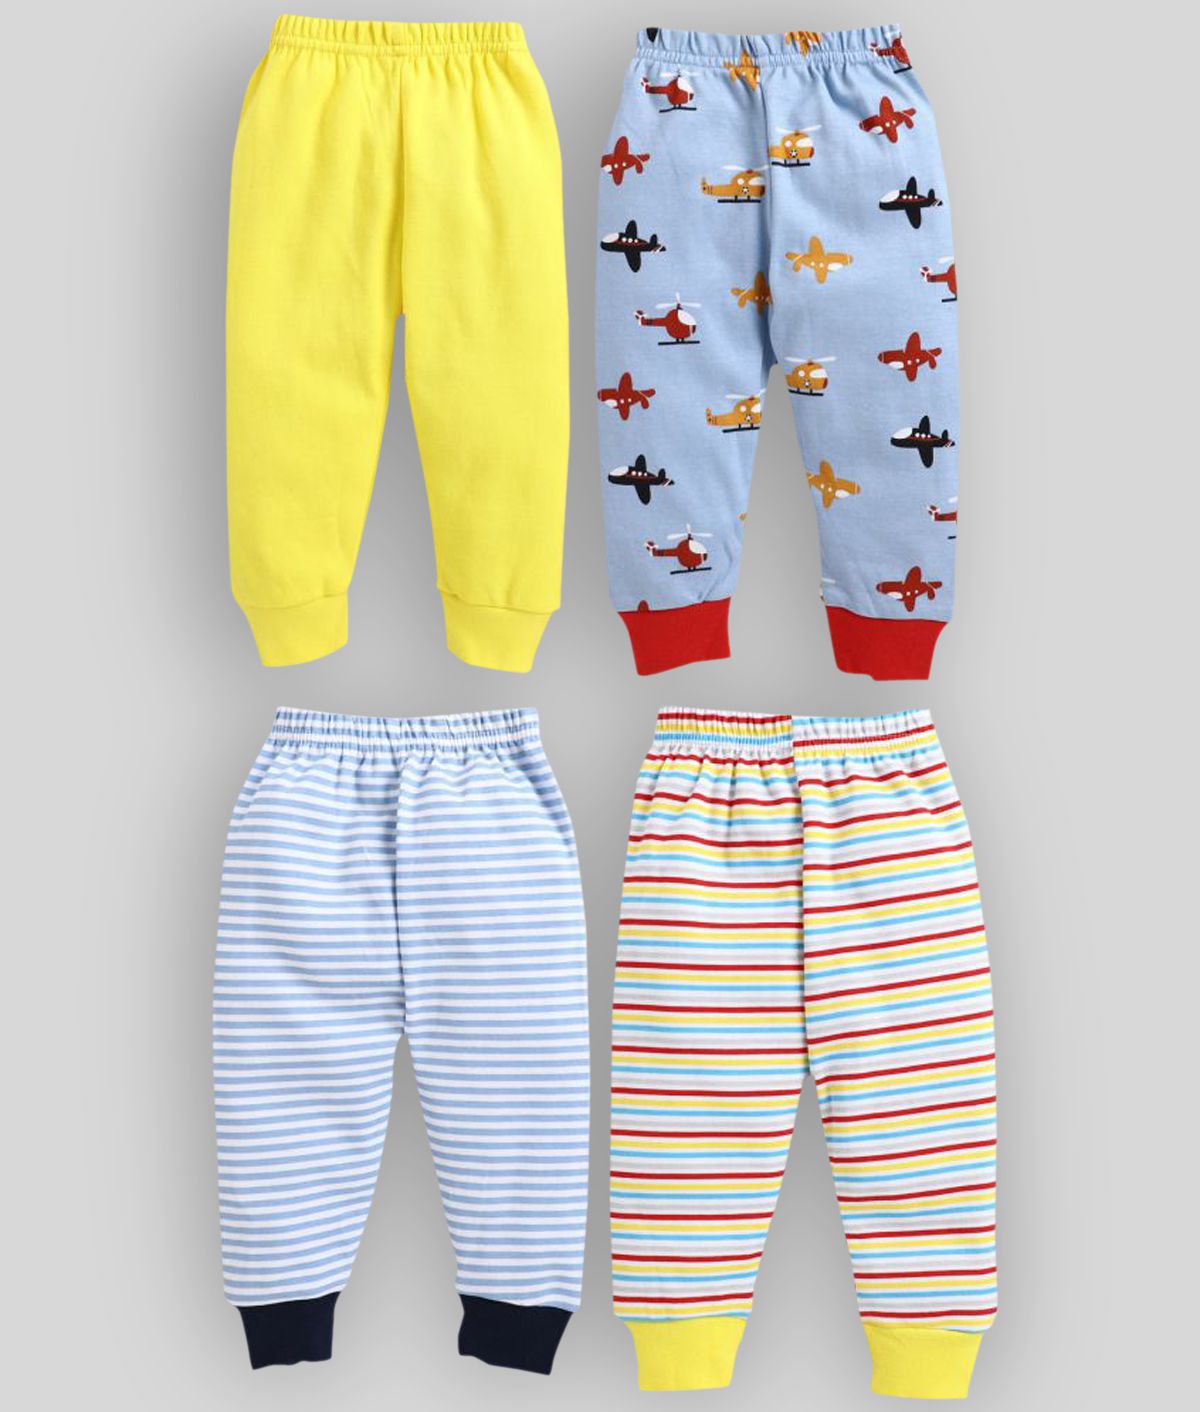     			BUMZEE Yellow & Blue Full Length Pajamas For Boys Pack Of 4 Age - 3-6 Months